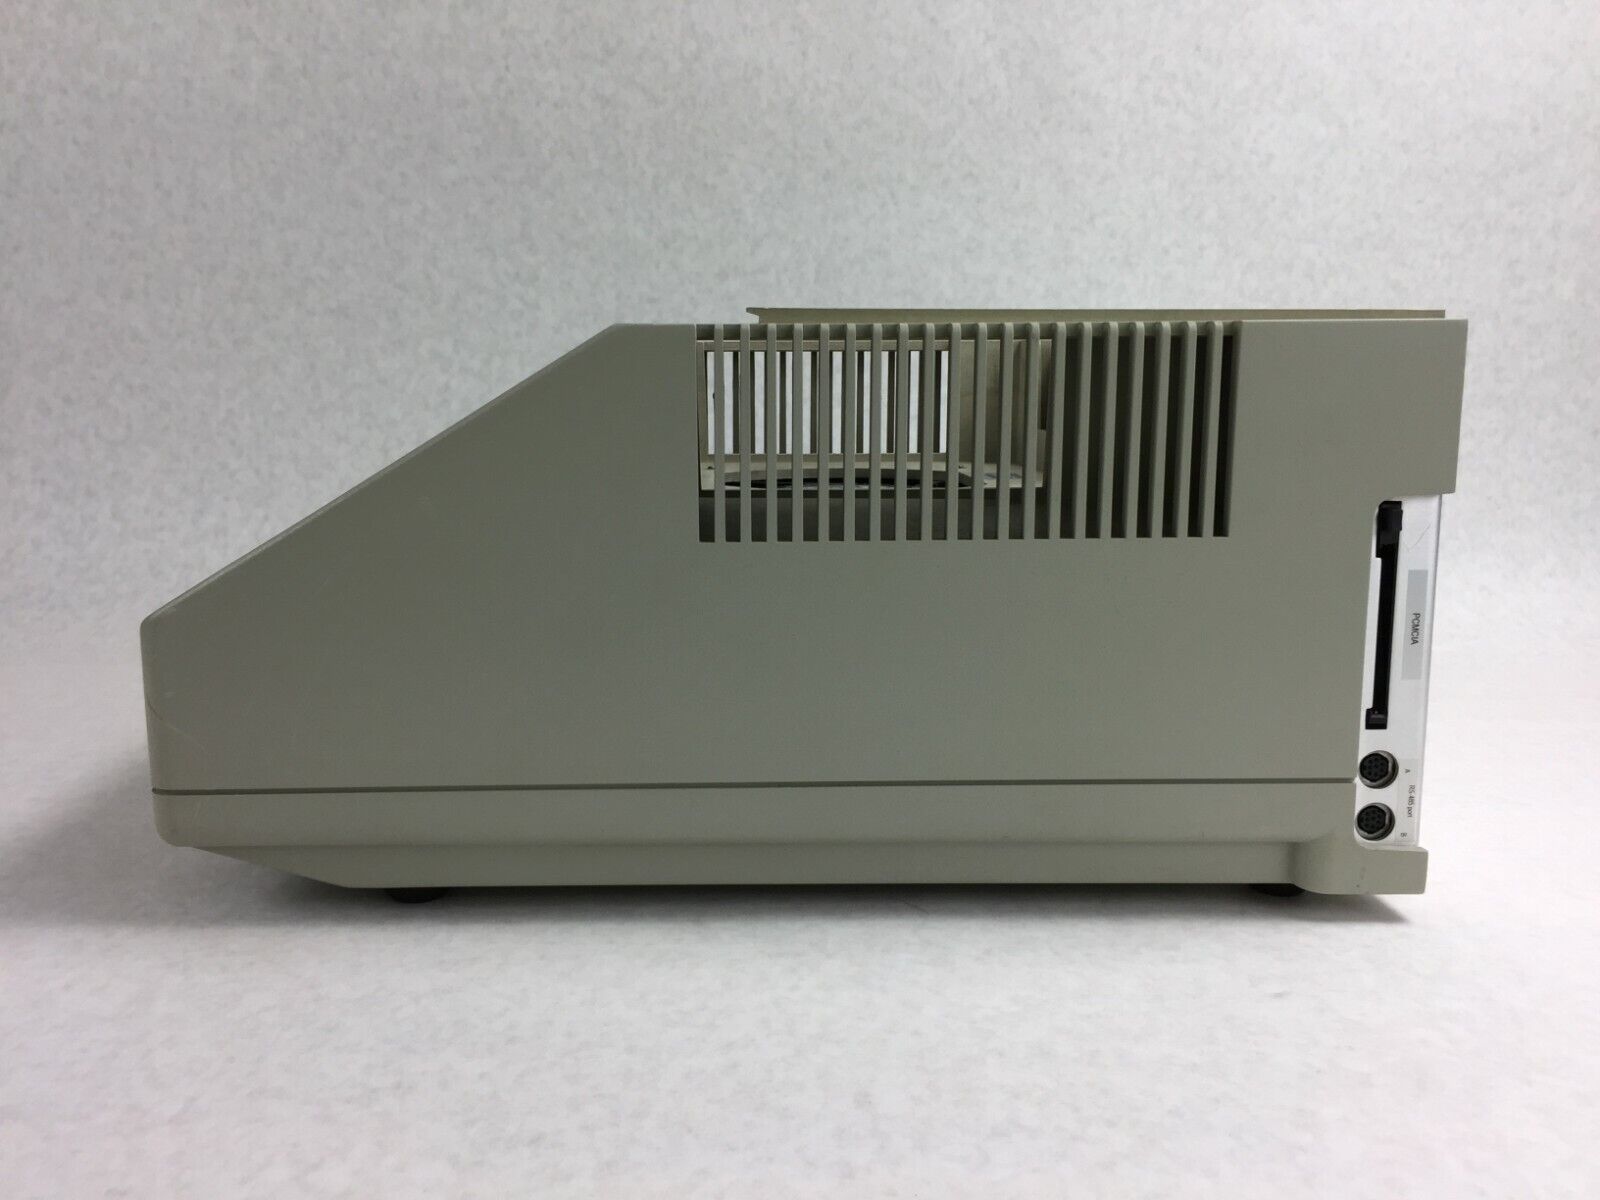 Applied Biosystems 9700 PCR System - Parts or Repair